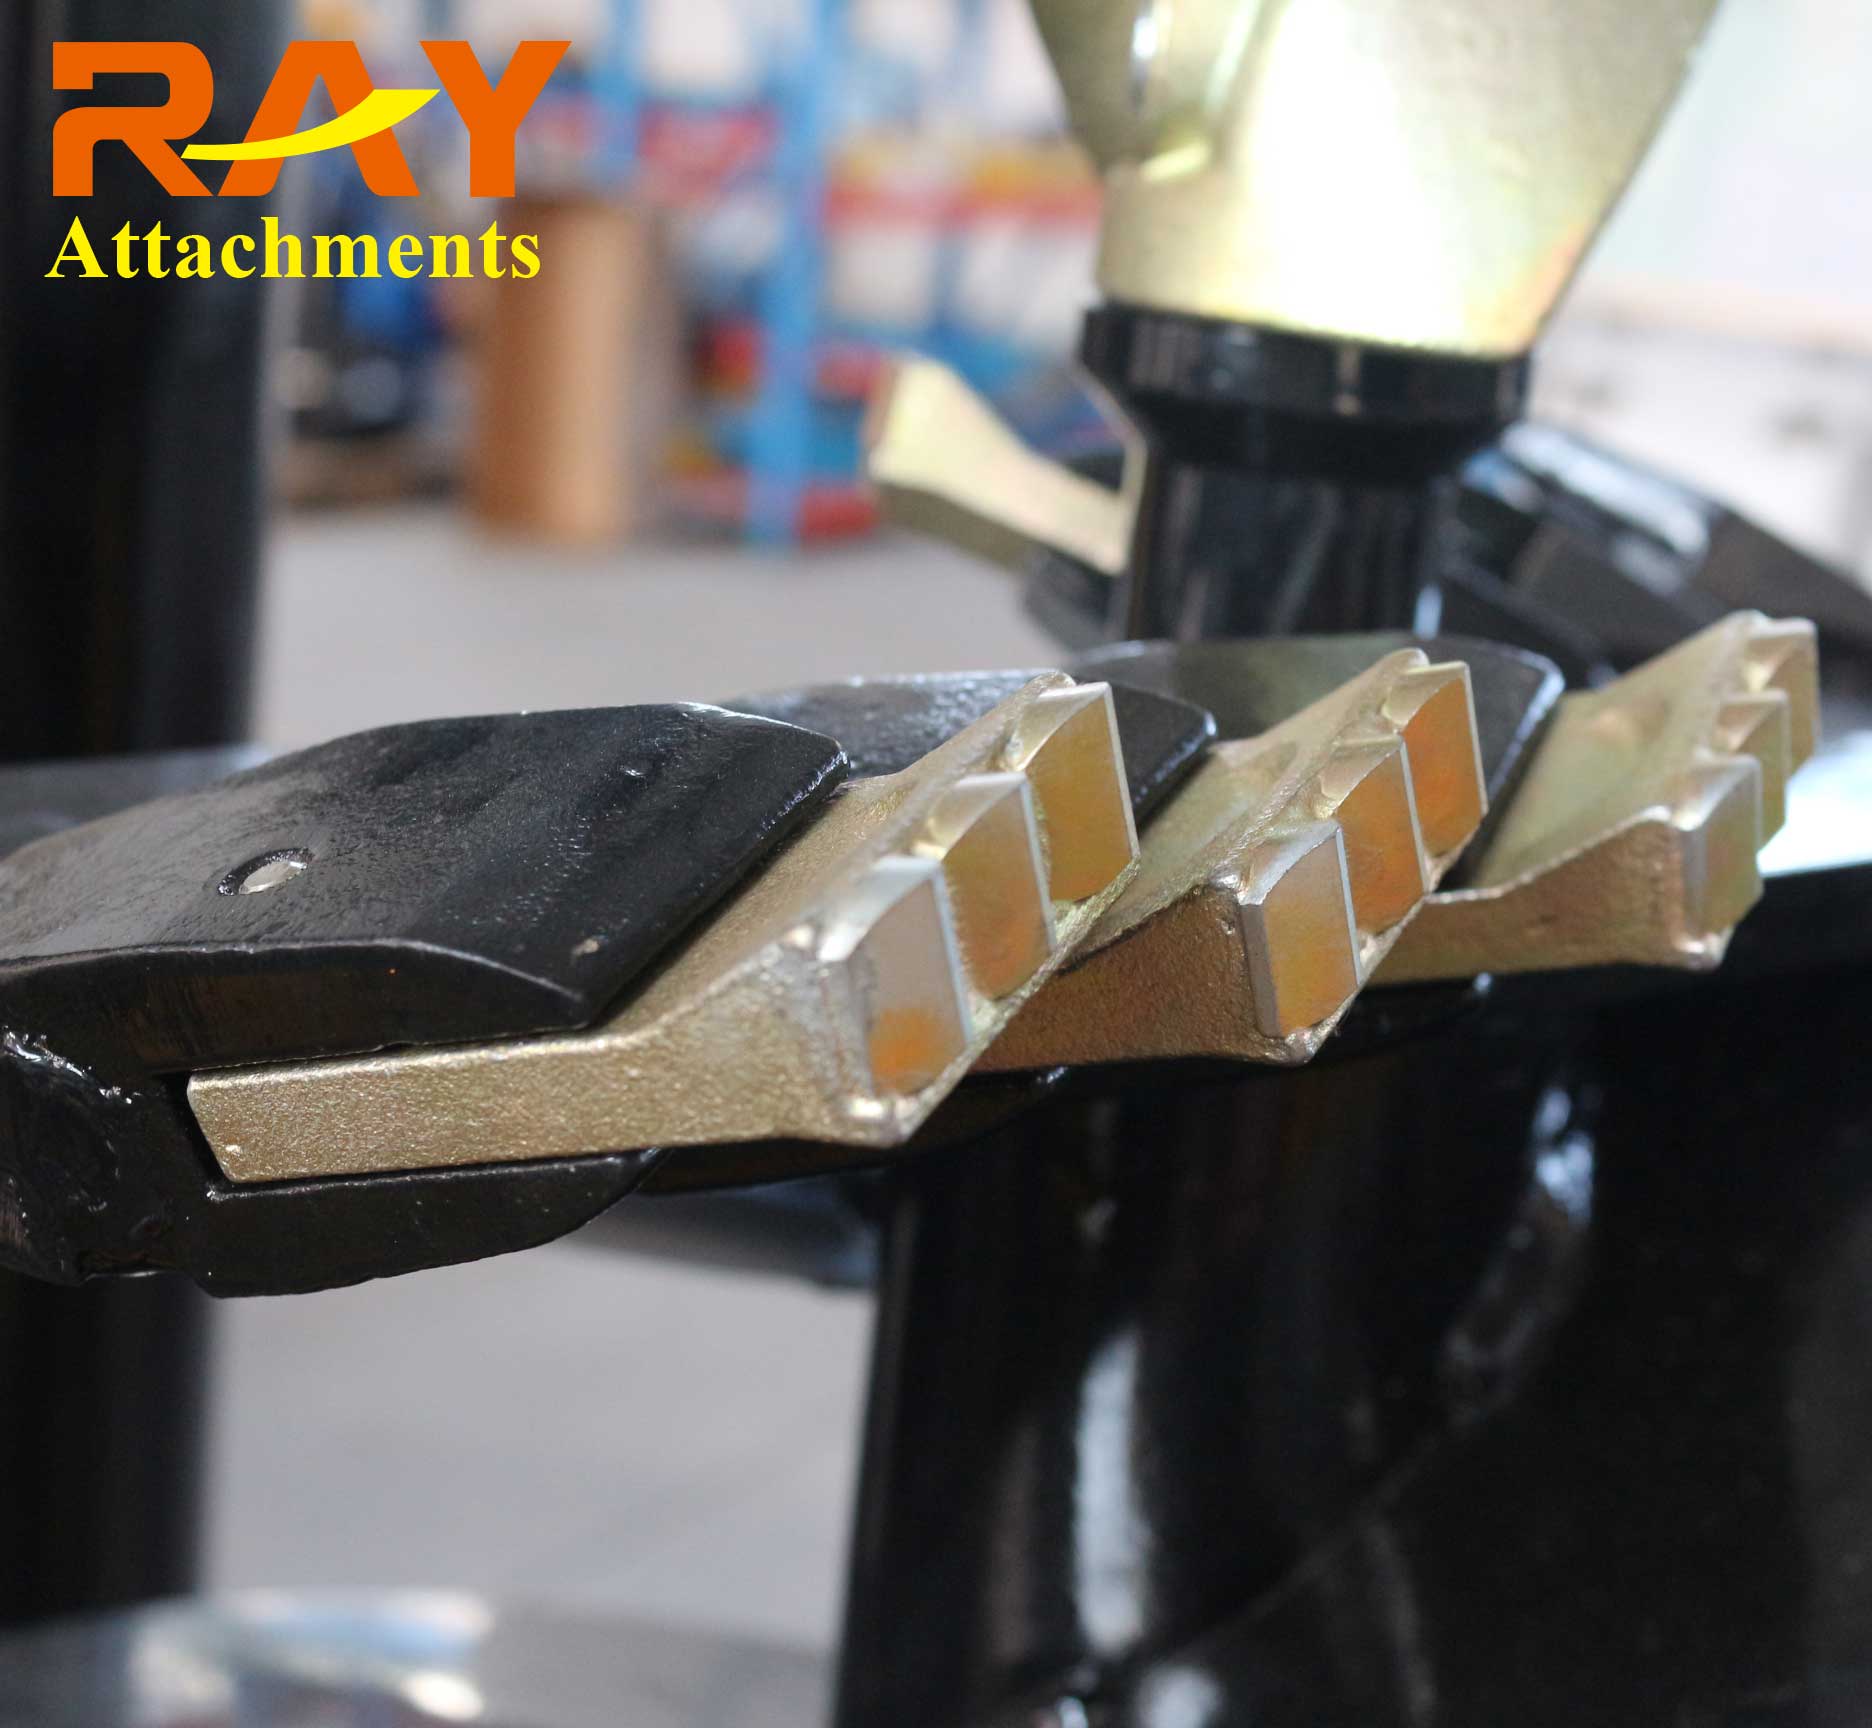 REA5500 model Earth Auger for excavator attachments